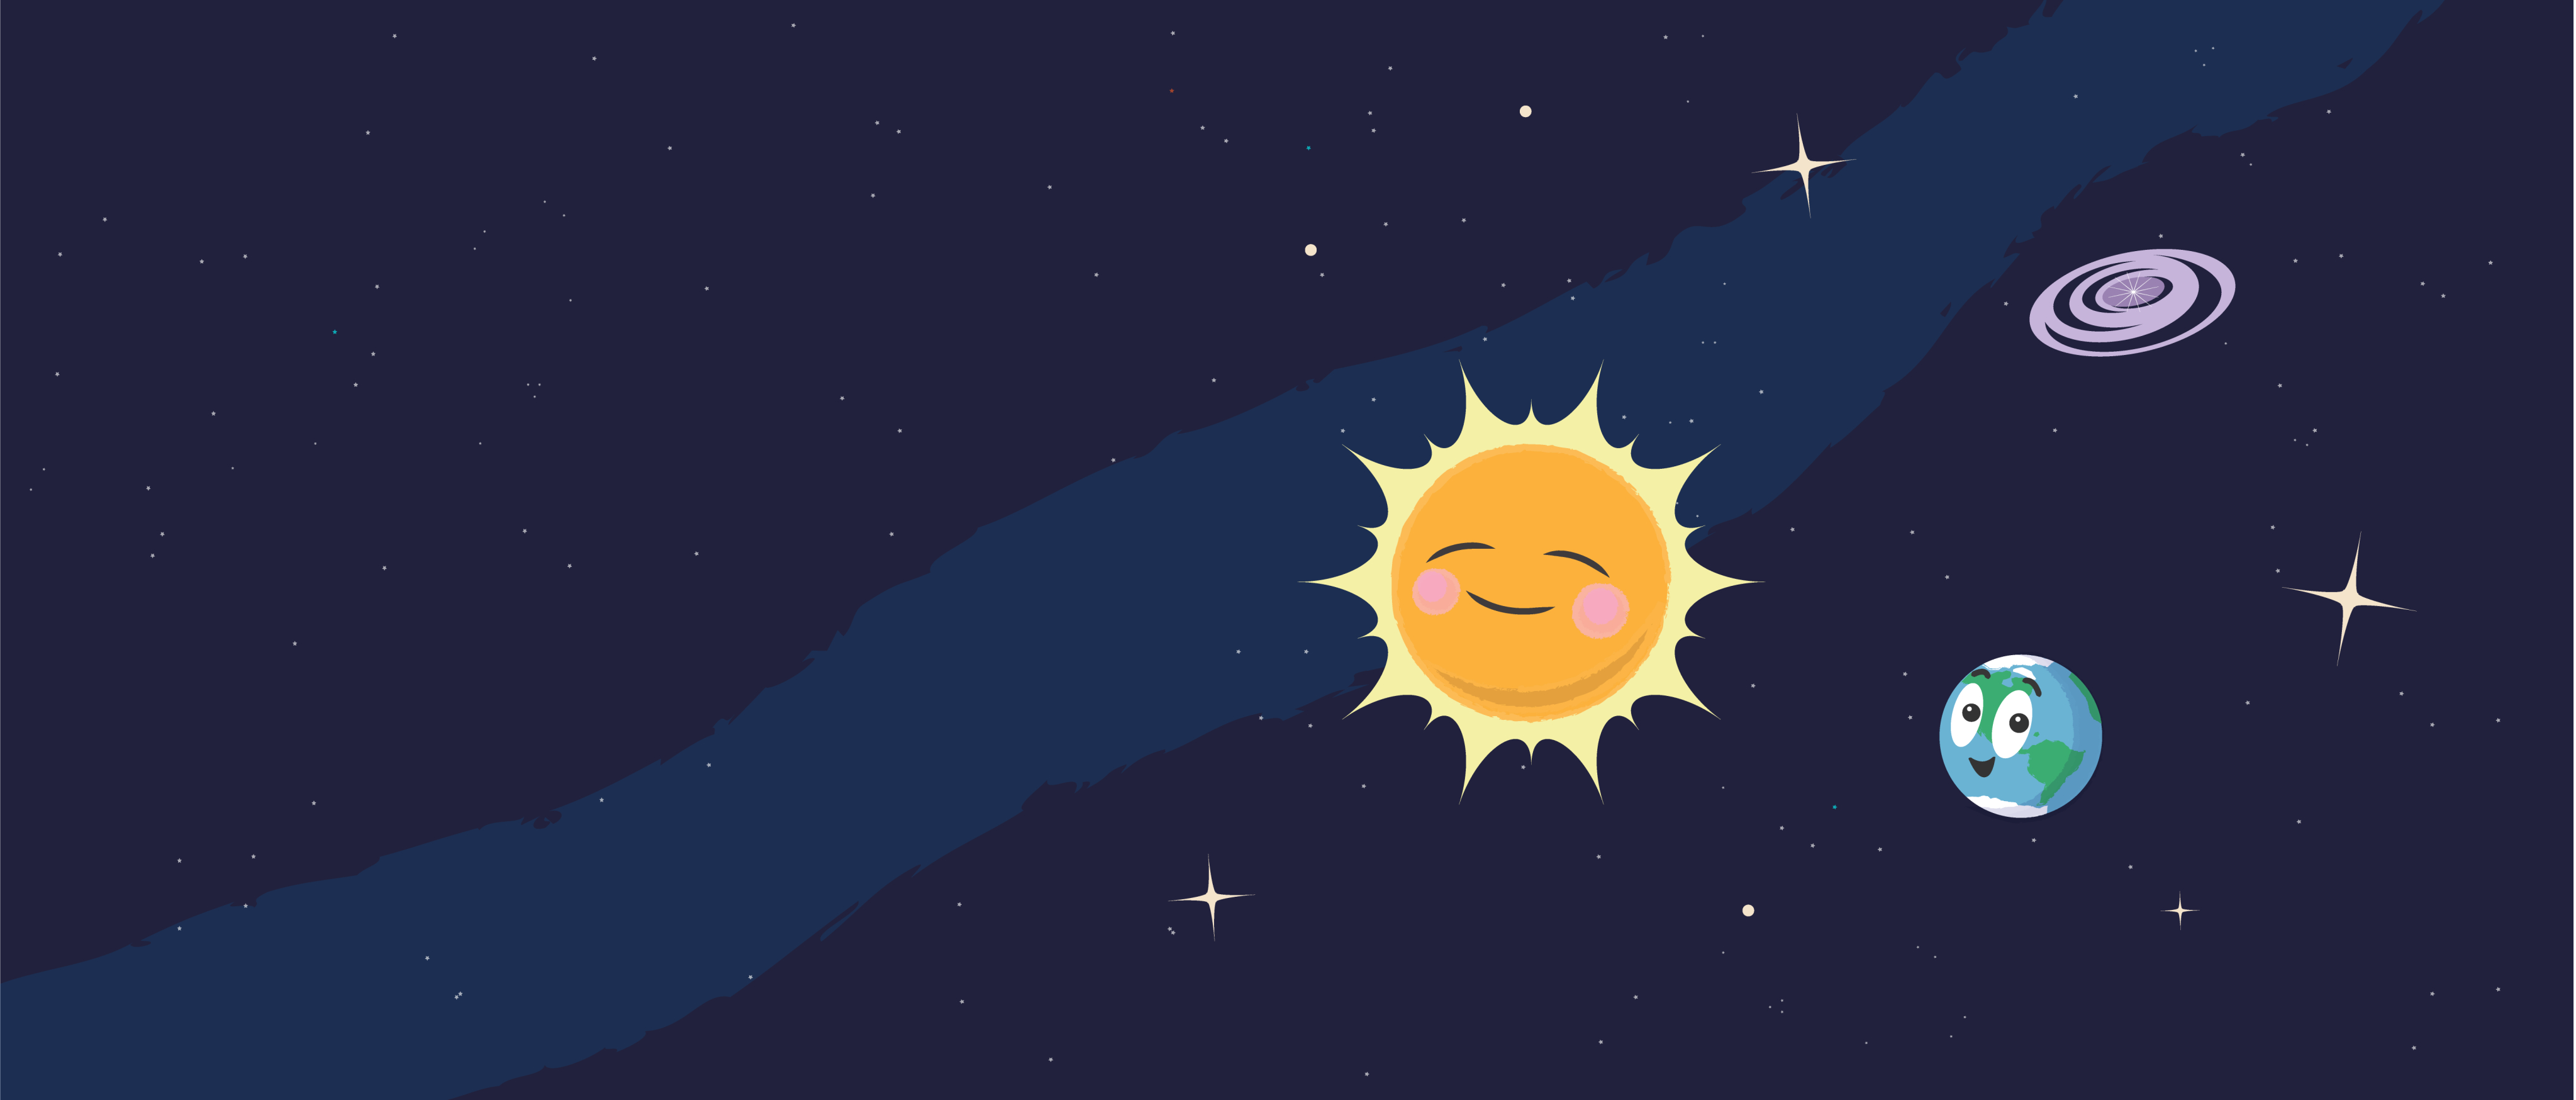 Cartoon illustration of the Sun and Earth smiling with a galaxy behind them in the distance.